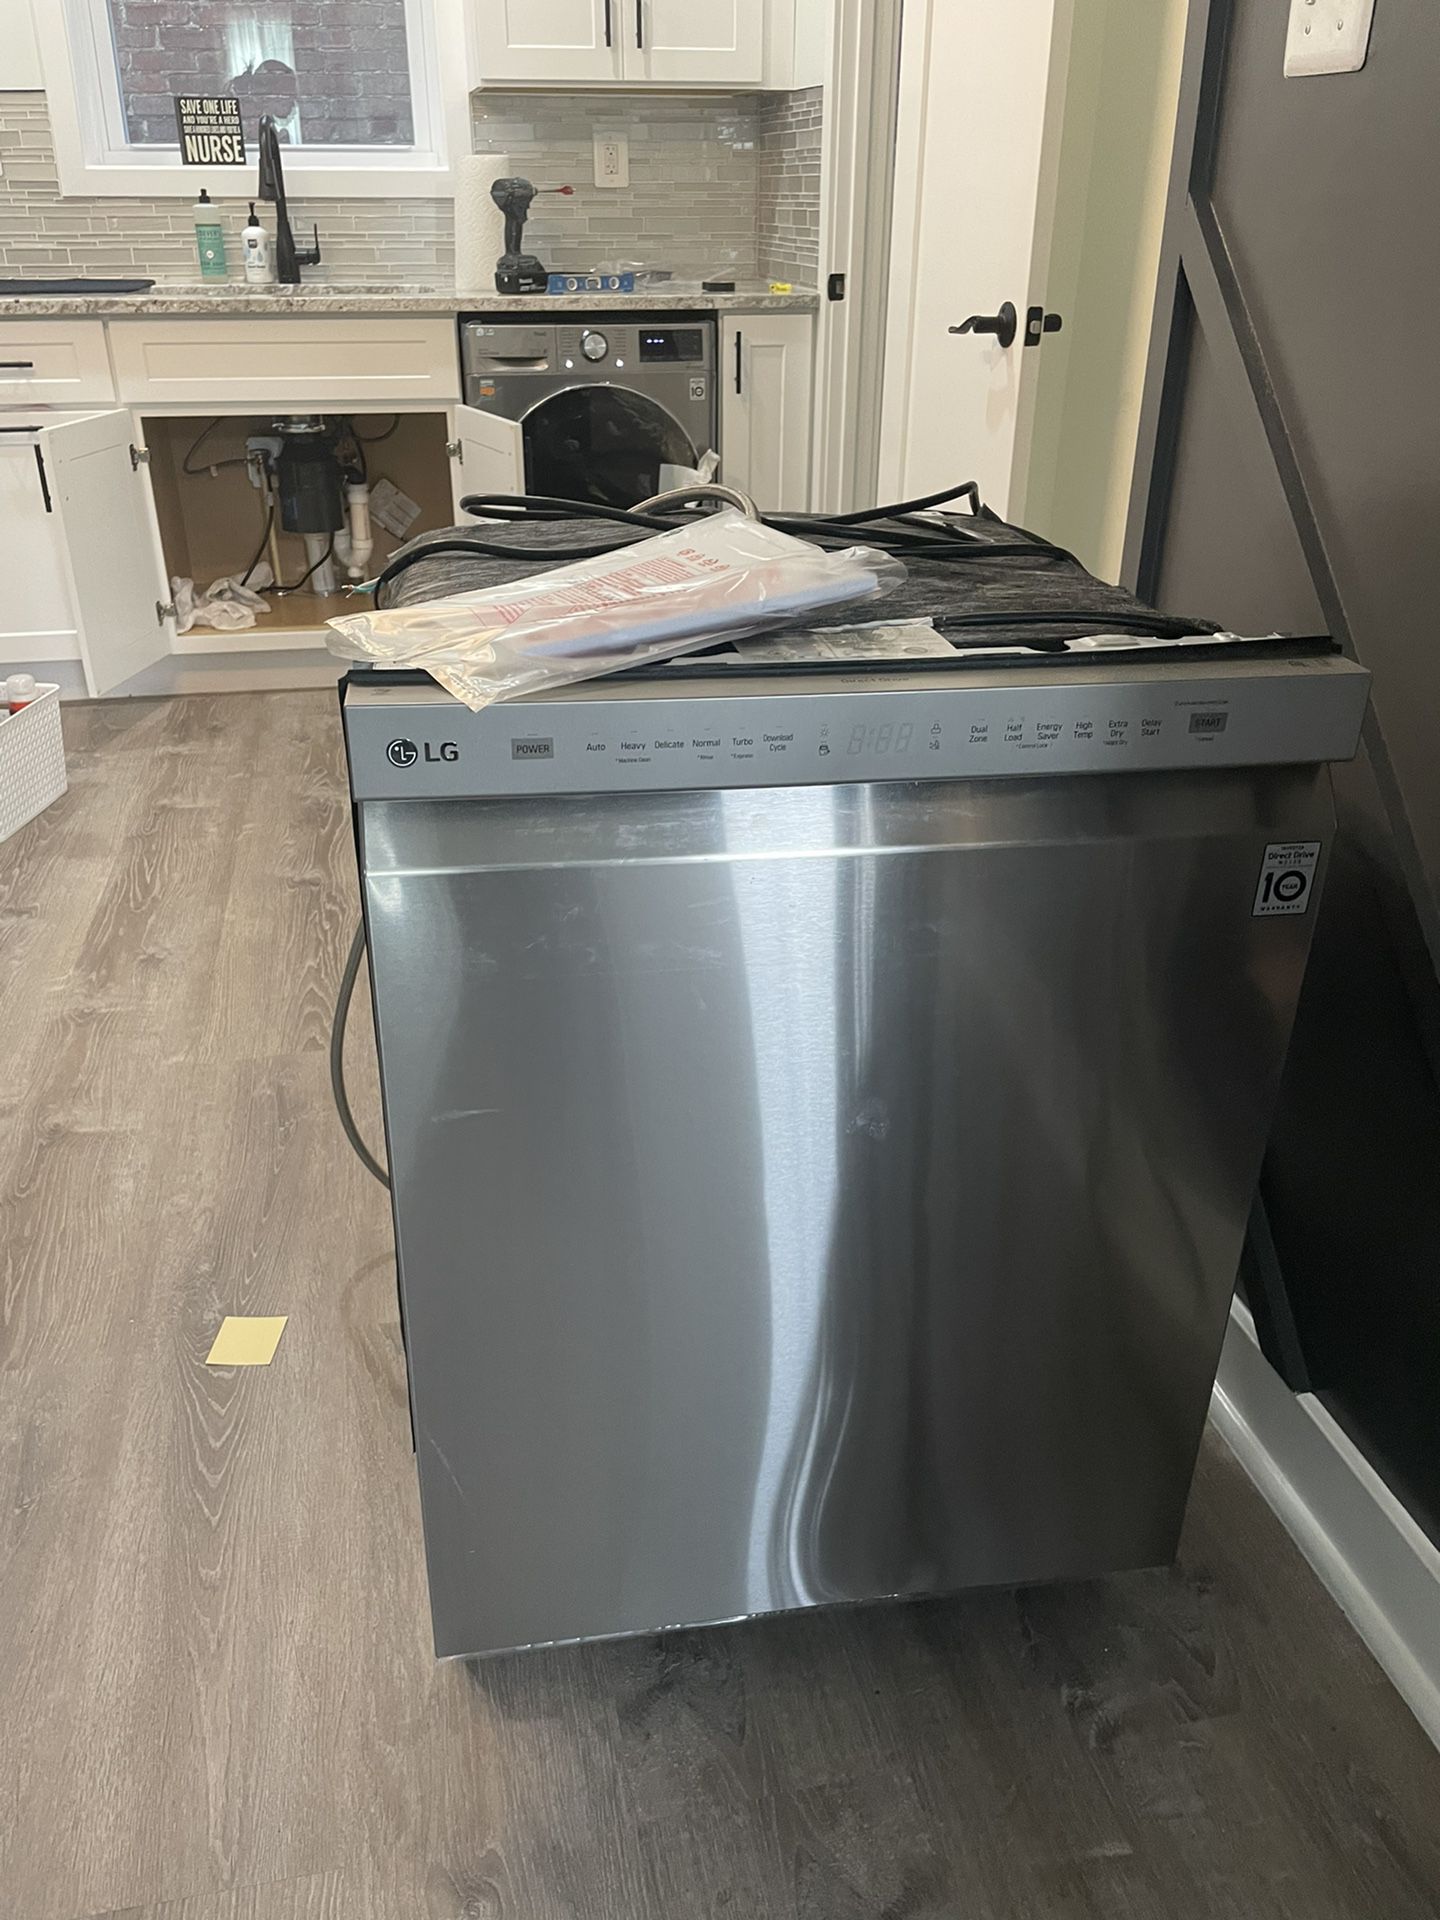 NEW LG Dishwasher Print Proof Stainless steel